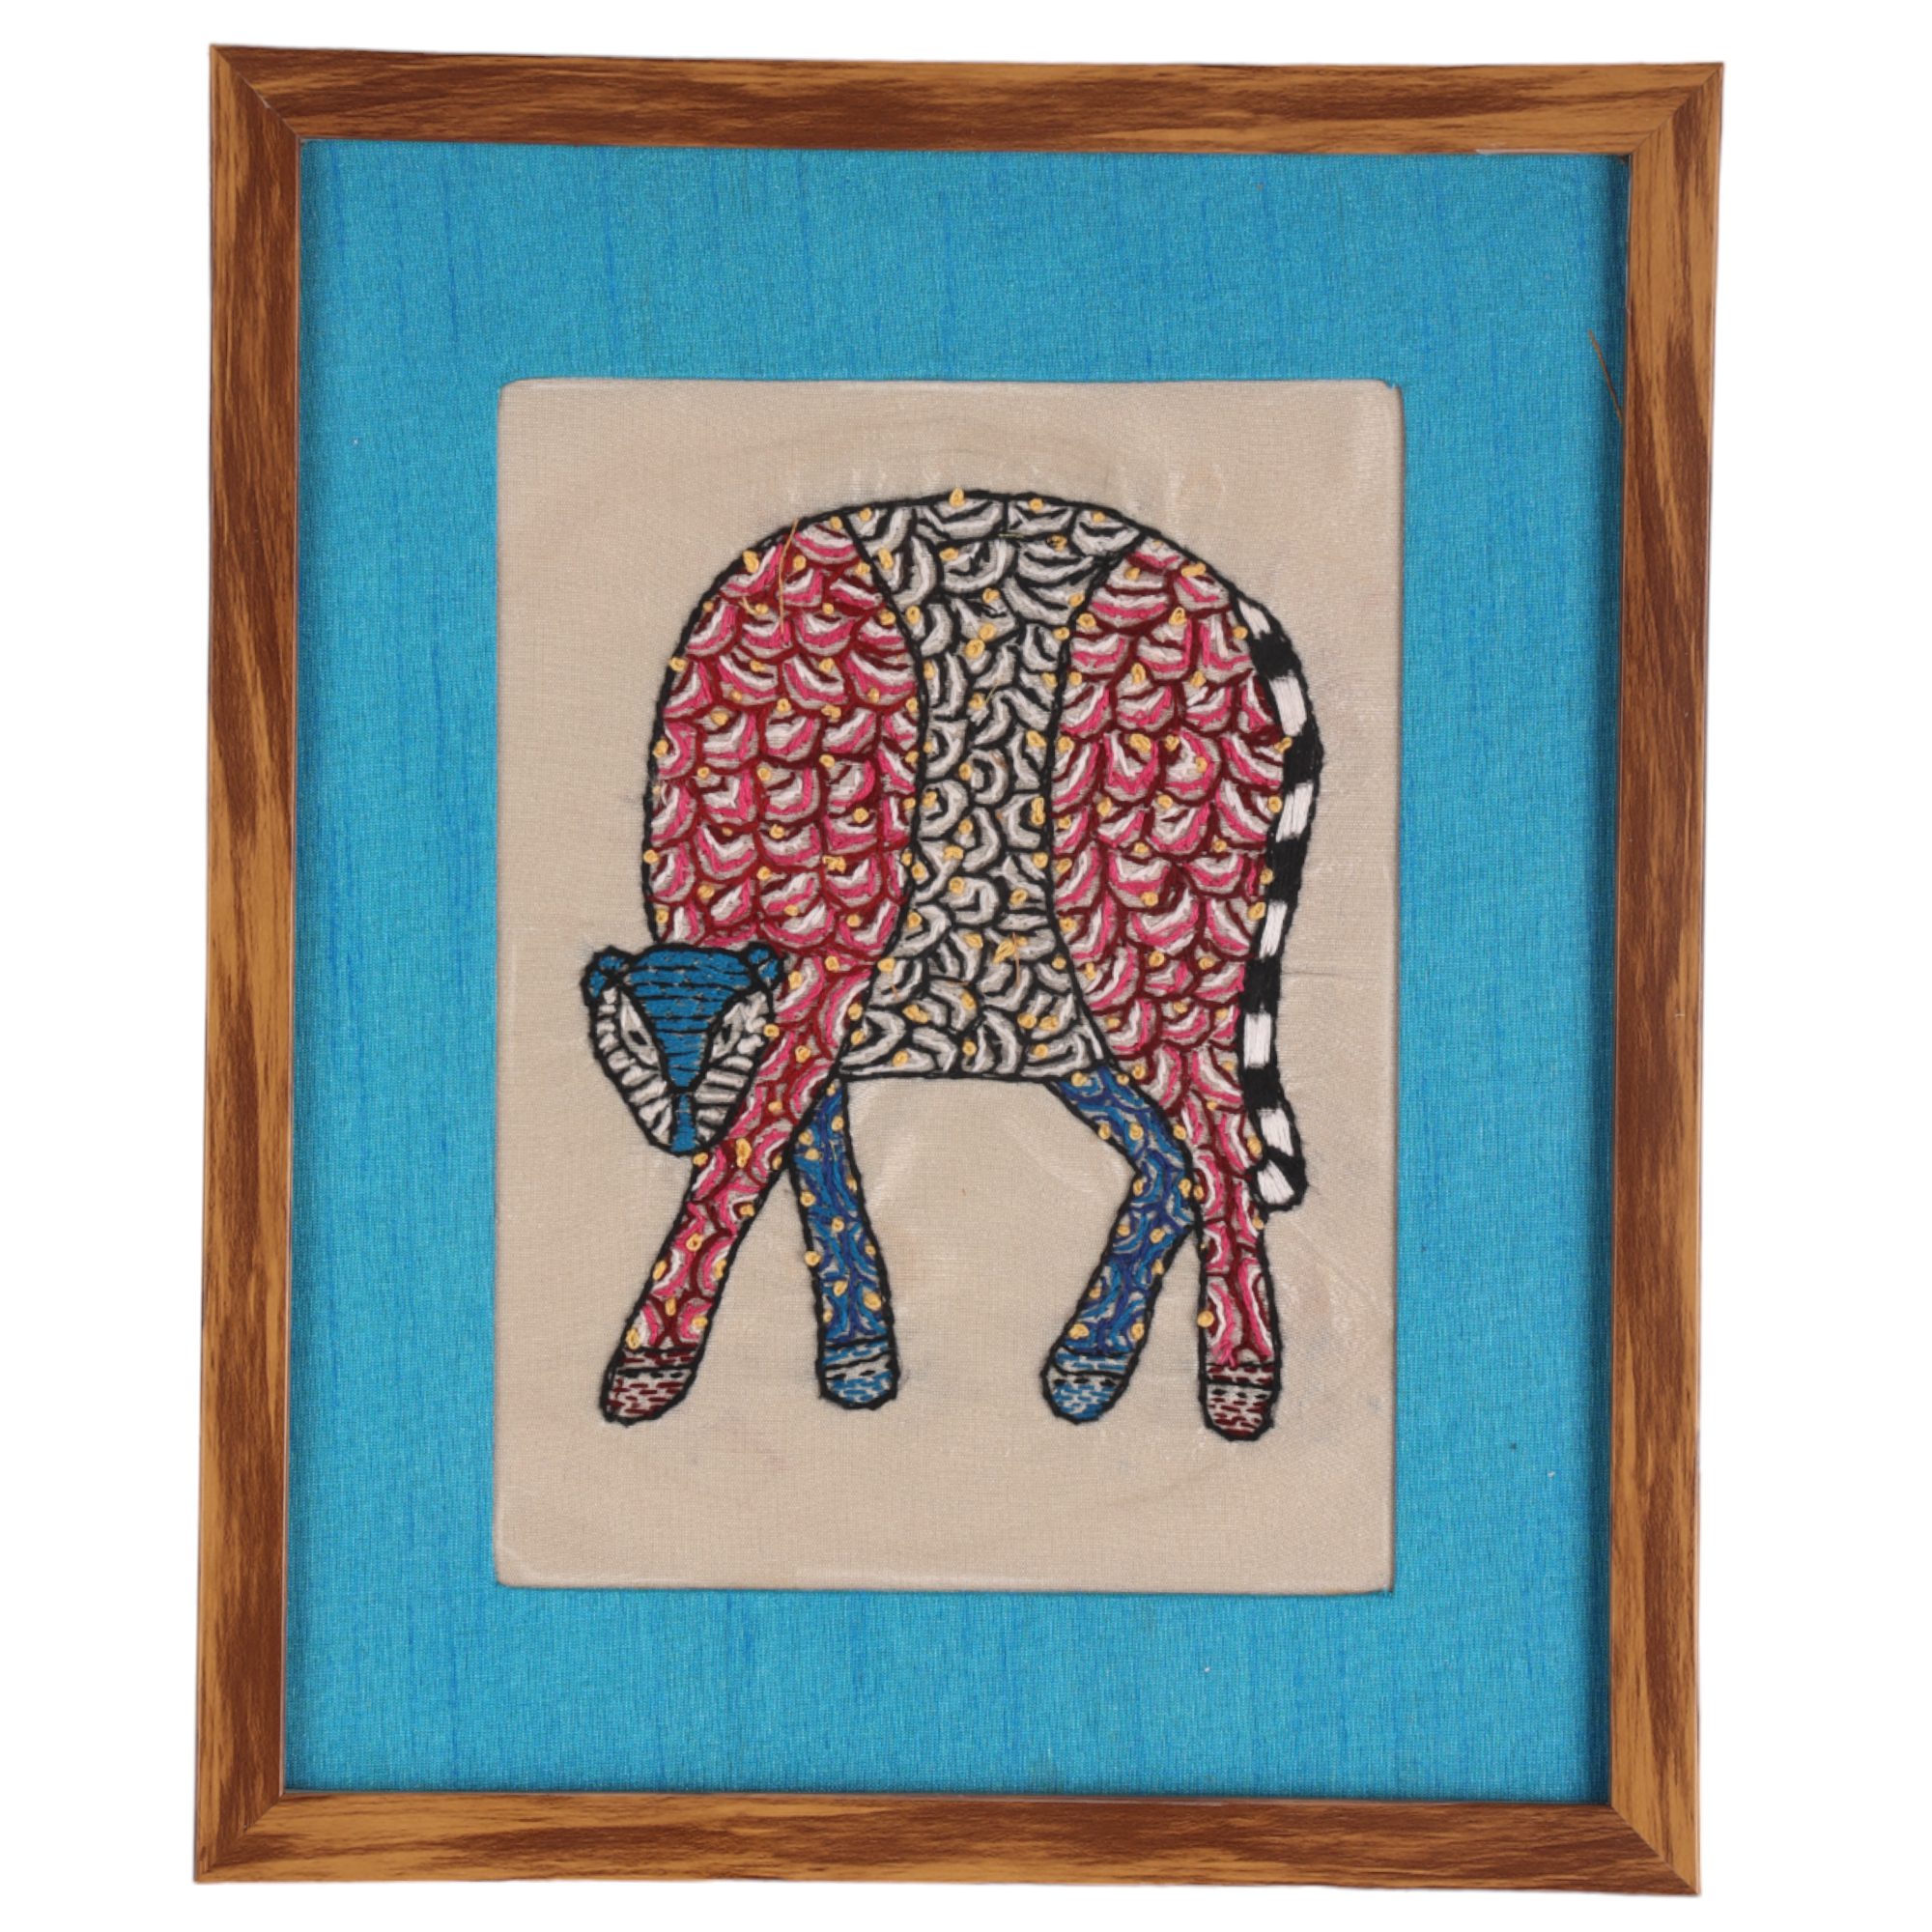 Get INDHA Wood Wall Decor Gift Leopard Embroidery